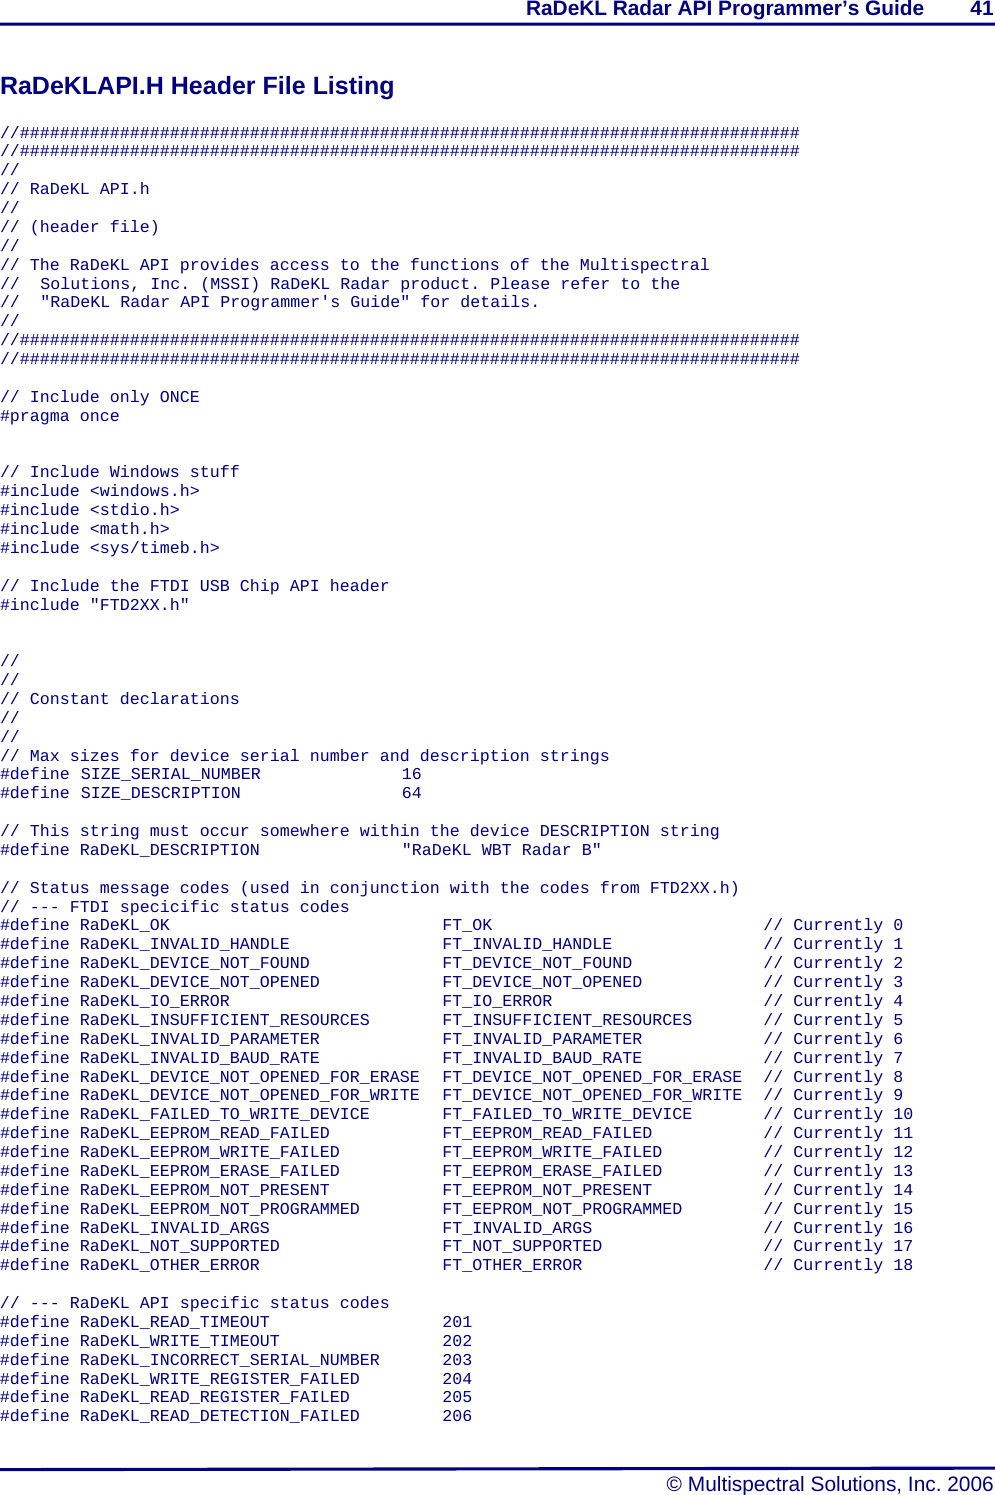 RaDeKL Radar API Programmer’s Guide        41   © Multispectral Solutions, Inc. 2006 RaDeKLAPI.H Header File Listing  //############################################################################## //############################################################################## // // RaDeKL API.h // // (header file) // // The RaDeKL API provides access to the functions of the Multispectral //  Solutions, Inc. (MSSI) RaDeKL Radar product. Please refer to the //  &quot;RaDeKL Radar API Programmer&apos;s Guide&quot; for details. // //############################################################################## //##############################################################################  // Include only ONCE #pragma once   // Include Windows stuff #include &lt;windows.h&gt; #include &lt;stdio.h&gt; #include &lt;math.h&gt; #include &lt;sys/timeb.h&gt;  // Include the FTDI USB Chip API header #include &quot;FTD2XX.h&quot;   // // // Constant declarations // // // Max sizes for device serial number and description strings #define SIZE_SERIAL_NUMBER    16 #define SIZE_DESCRIPTION     64  // This string must occur somewhere within the device DESCRIPTION string #define RaDeKL_DESCRIPTION        &quot;RaDeKL WBT Radar B&quot;  // Status message codes (used in conjunction with the codes from FTD2XX.h) // --- FTDI specicific status codes #define RaDeKL_OK       FT_OK       // Currently 0 #define RaDeKL_INVALID_HANDLE    FT_INVALID_HANDLE    // Currently 1 #define RaDeKL_DEVICE_NOT_FOUND    FT_DEVICE_NOT_FOUND    // Currently 2 #define RaDeKL_DEVICE_NOT_OPENED    FT_DEVICE_NOT_OPENED    // Currently 3 #define RaDeKL_IO_ERROR      FT_IO_ERROR      // Currently 4 #define RaDeKL_INSUFFICIENT_RESOURCES    FT_INSUFFICIENT_RESOURCES    // Currently 5 #define RaDeKL_INVALID_PARAMETER    FT_INVALID_PARAMETER    // Currently 6 #define RaDeKL_INVALID_BAUD_RATE    FT_INVALID_BAUD_RATE    // Currently 7 #define RaDeKL_DEVICE_NOT_OPENED_FOR_ERASE  FT_DEVICE_NOT_OPENED_FOR_ERASE  // Currently 8 #define RaDeKL_DEVICE_NOT_OPENED_FOR_WRITE  FT_DEVICE_NOT_OPENED_FOR_WRITE  // Currently 9 #define RaDeKL_FAILED_TO_WRITE_DEVICE    FT_FAILED_TO_WRITE_DEVICE    // Currently 10 #define RaDeKL_EEPROM_READ_FAILED   FT_EEPROM_READ_FAILED   // Currently 11 #define RaDeKL_EEPROM_WRITE_FAILED   FT_EEPROM_WRITE_FAILED   // Currently 12 #define RaDeKL_EEPROM_ERASE_FAILED   FT_EEPROM_ERASE_FAILED   // Currently 13 #define RaDeKL_EEPROM_NOT_PRESENT   FT_EEPROM_NOT_PRESENT   // Currently 14 #define RaDeKL_EEPROM_NOT_PROGRAMMED   FT_EEPROM_NOT_PROGRAMMED     // Currently 15 #define RaDeKL_INVALID_ARGS     FT_INVALID_ARGS     // Currently 16 #define RaDeKL_NOT_SUPPORTED     FT_NOT_SUPPORTED     // Currently 17 #define RaDeKL_OTHER_ERROR     FT_OTHER_ERROR     // Currently 18  // --- RaDeKL API specific status codes #define RaDeKL_READ_TIMEOUT     201 #define RaDeKL_WRITE_TIMEOUT     202 #define RaDeKL_INCORRECT_SERIAL_NUMBER    203 #define RaDeKL_WRITE_REGISTER_FAILED   204 #define RaDeKL_READ_REGISTER_FAILED   205 #define RaDeKL_READ_DETECTION_FAILED   206 